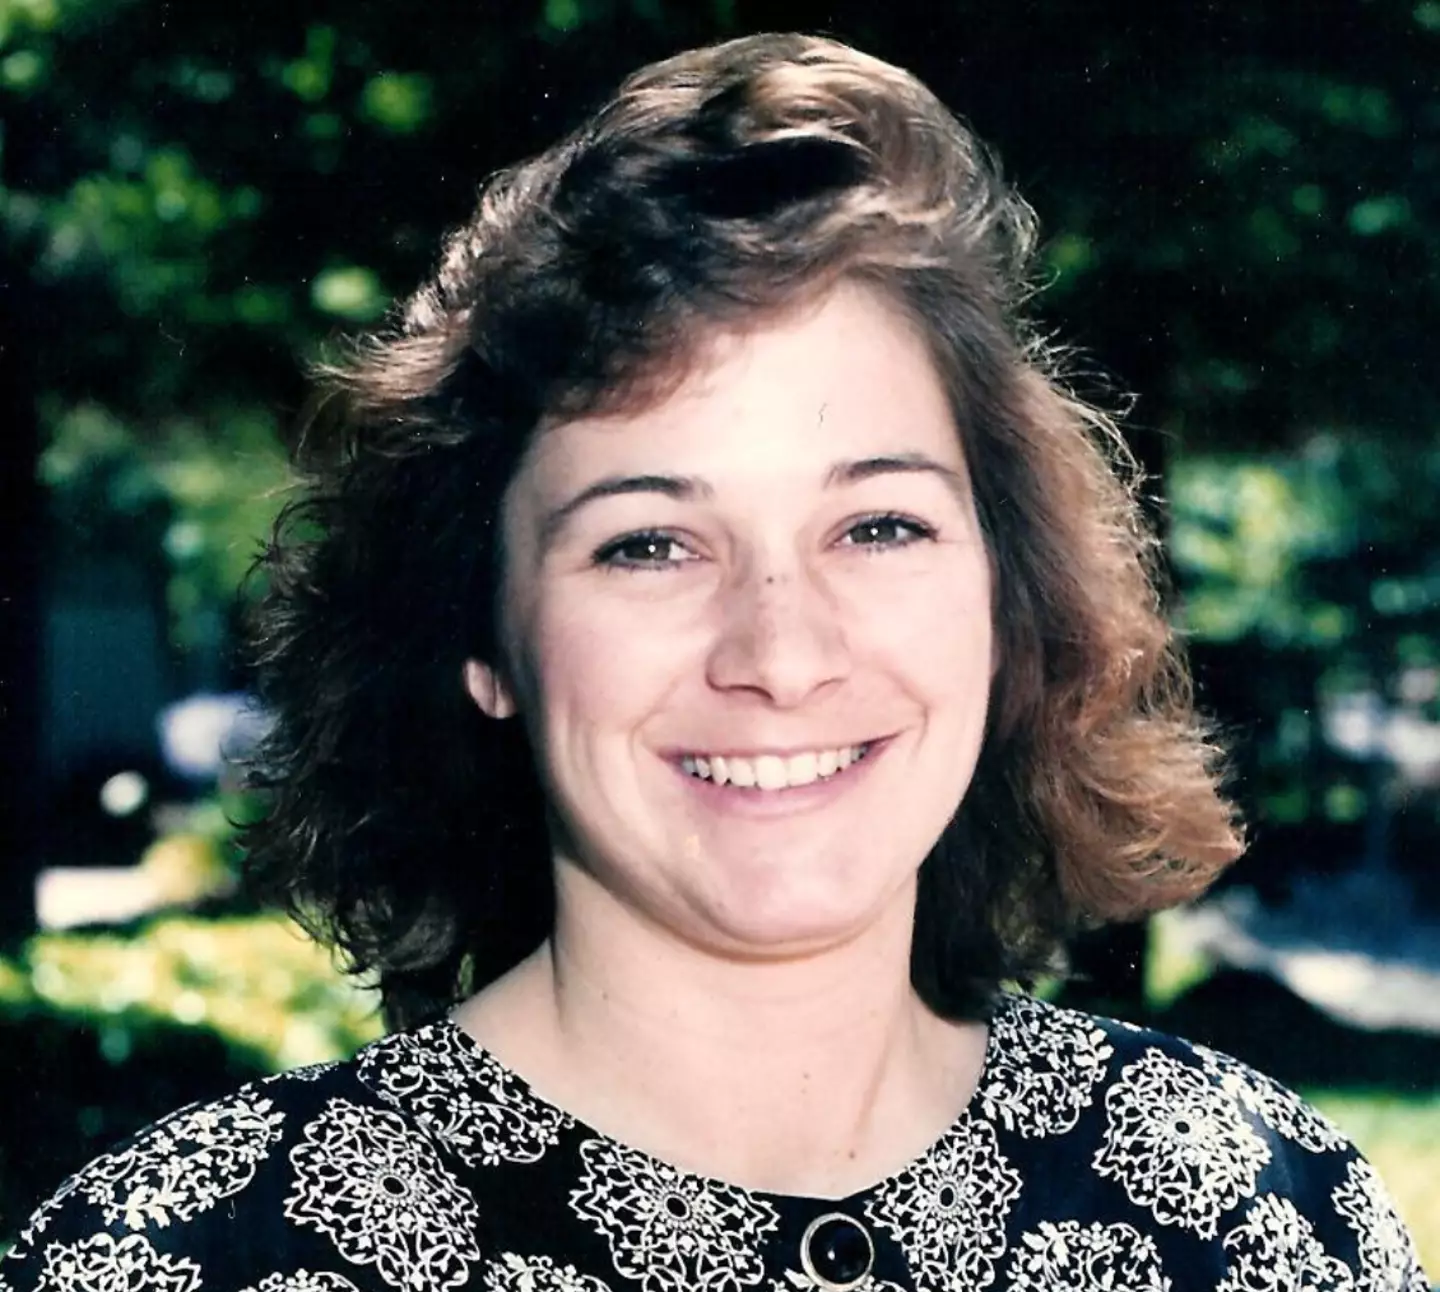 Laurie Houts worked as a computer engineer at Adobe Systems.